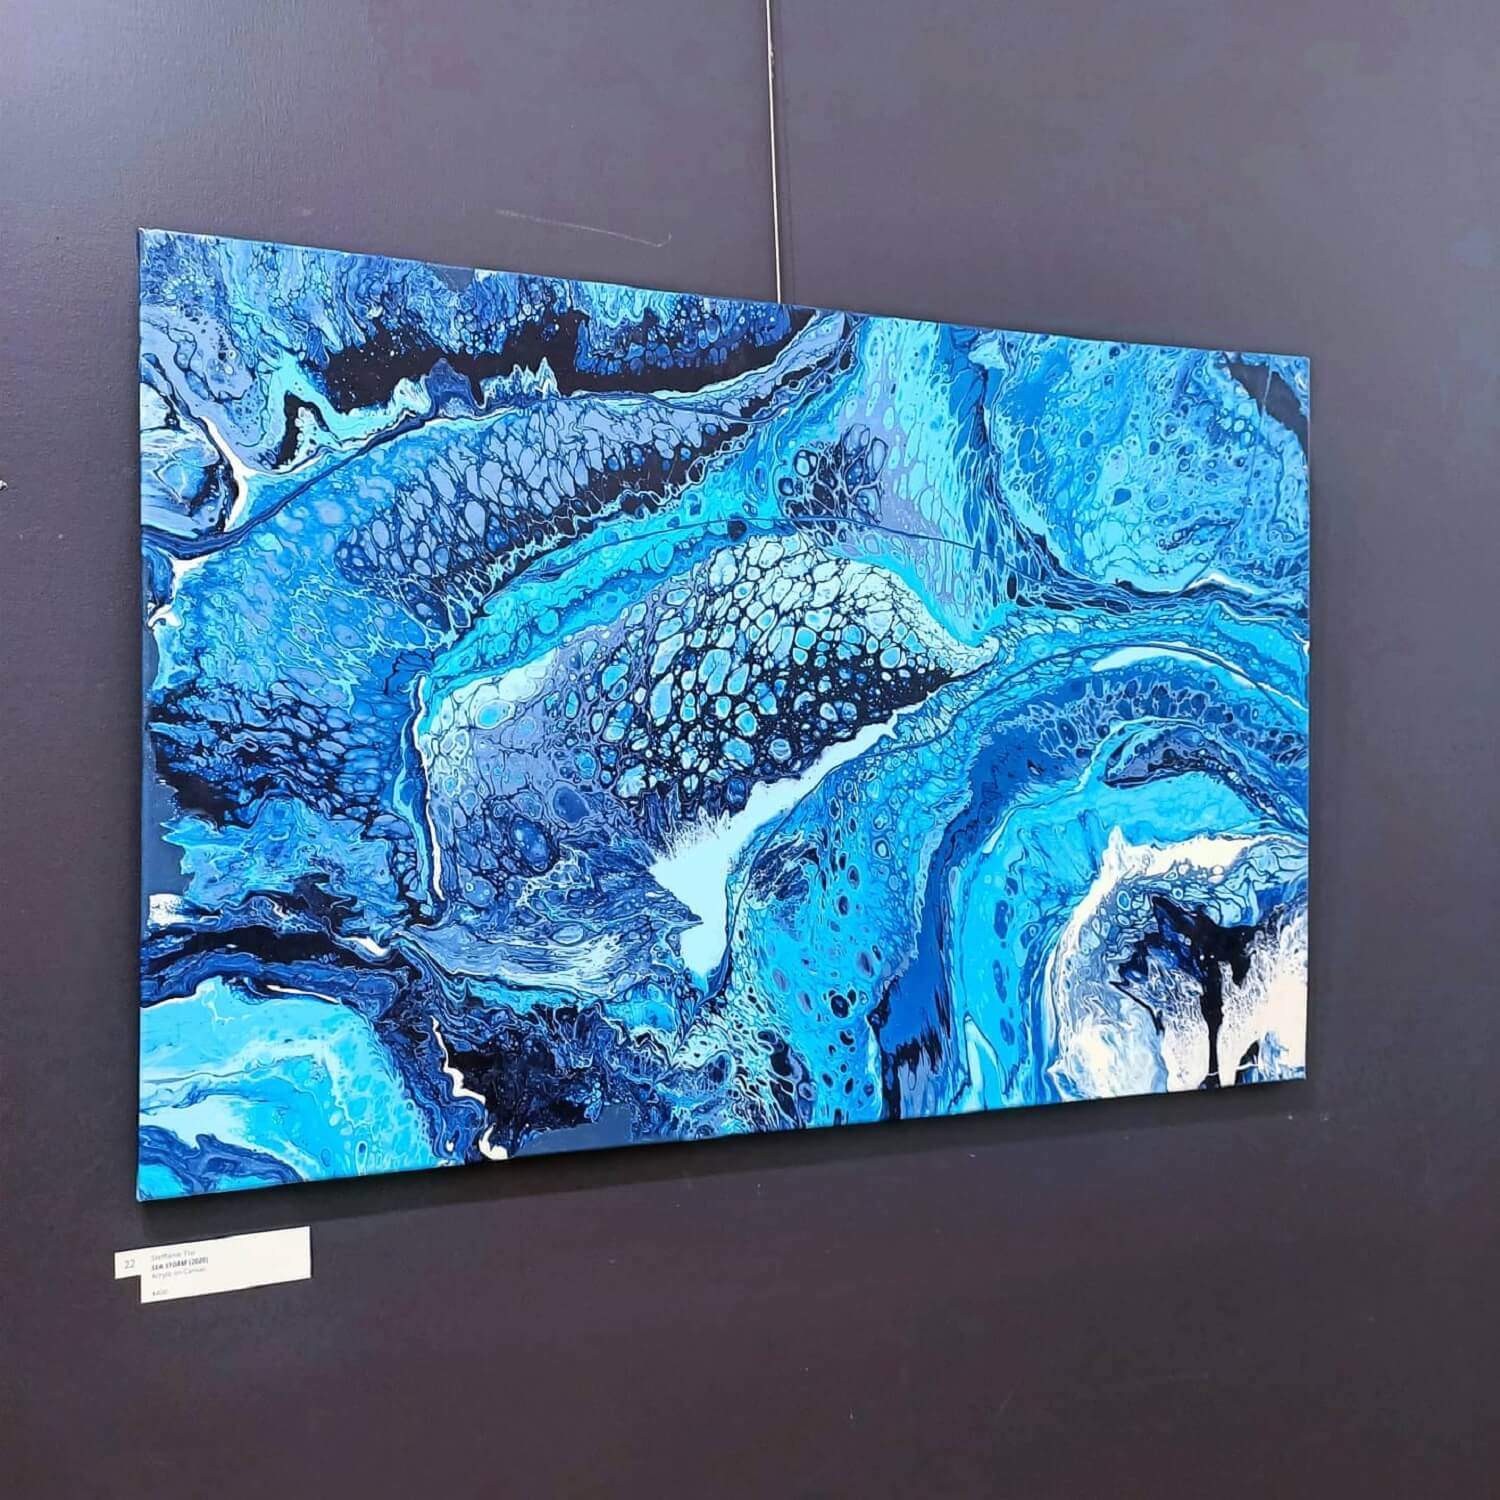 Blue ocean inspired pour painting named Sea storm by Steff arttt.